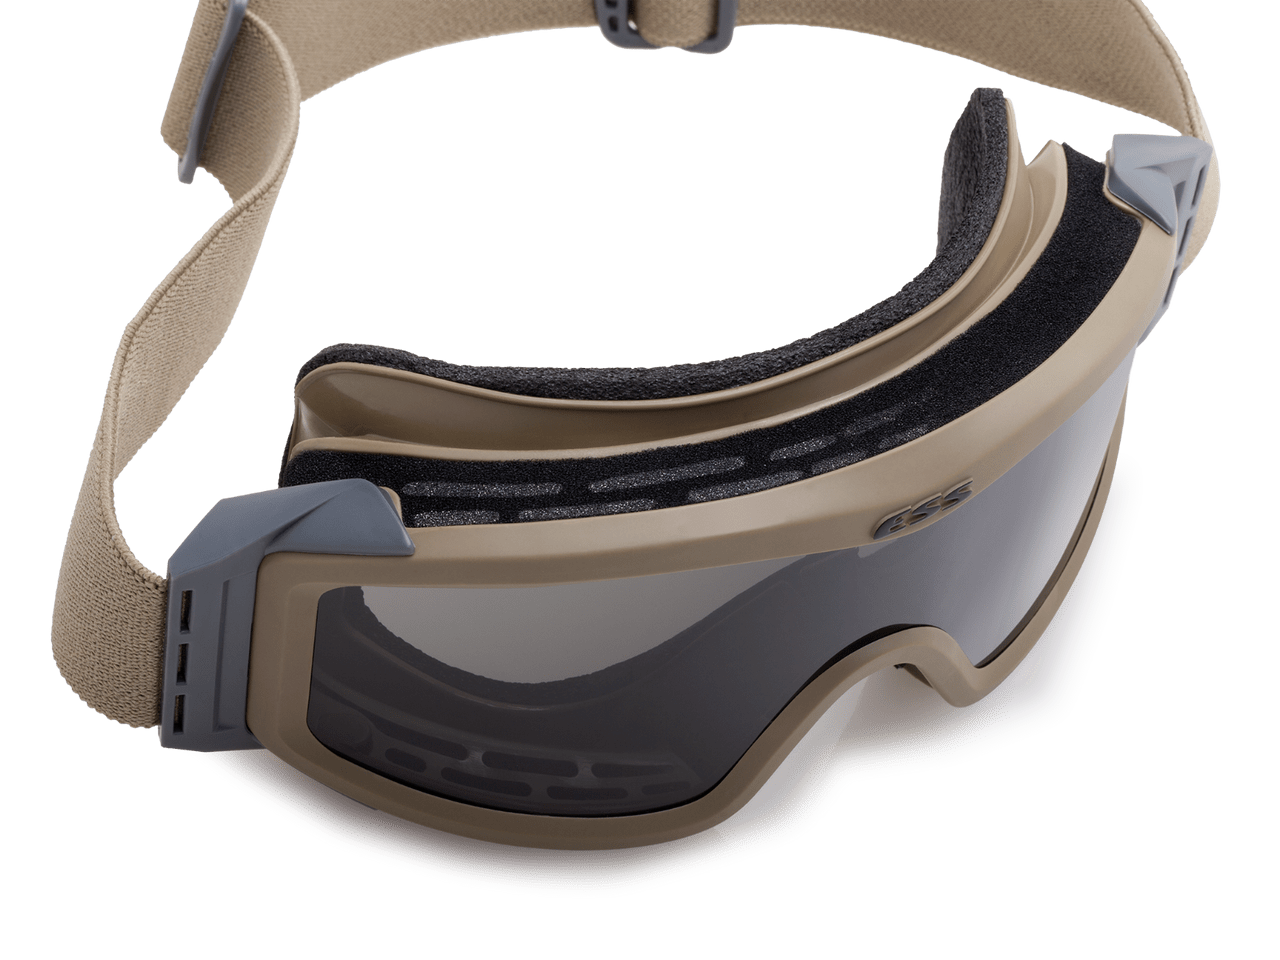 ESS Profile NVG Goggles Terrain Tan with Clear and Gray Lenses 740-0500 Closeup